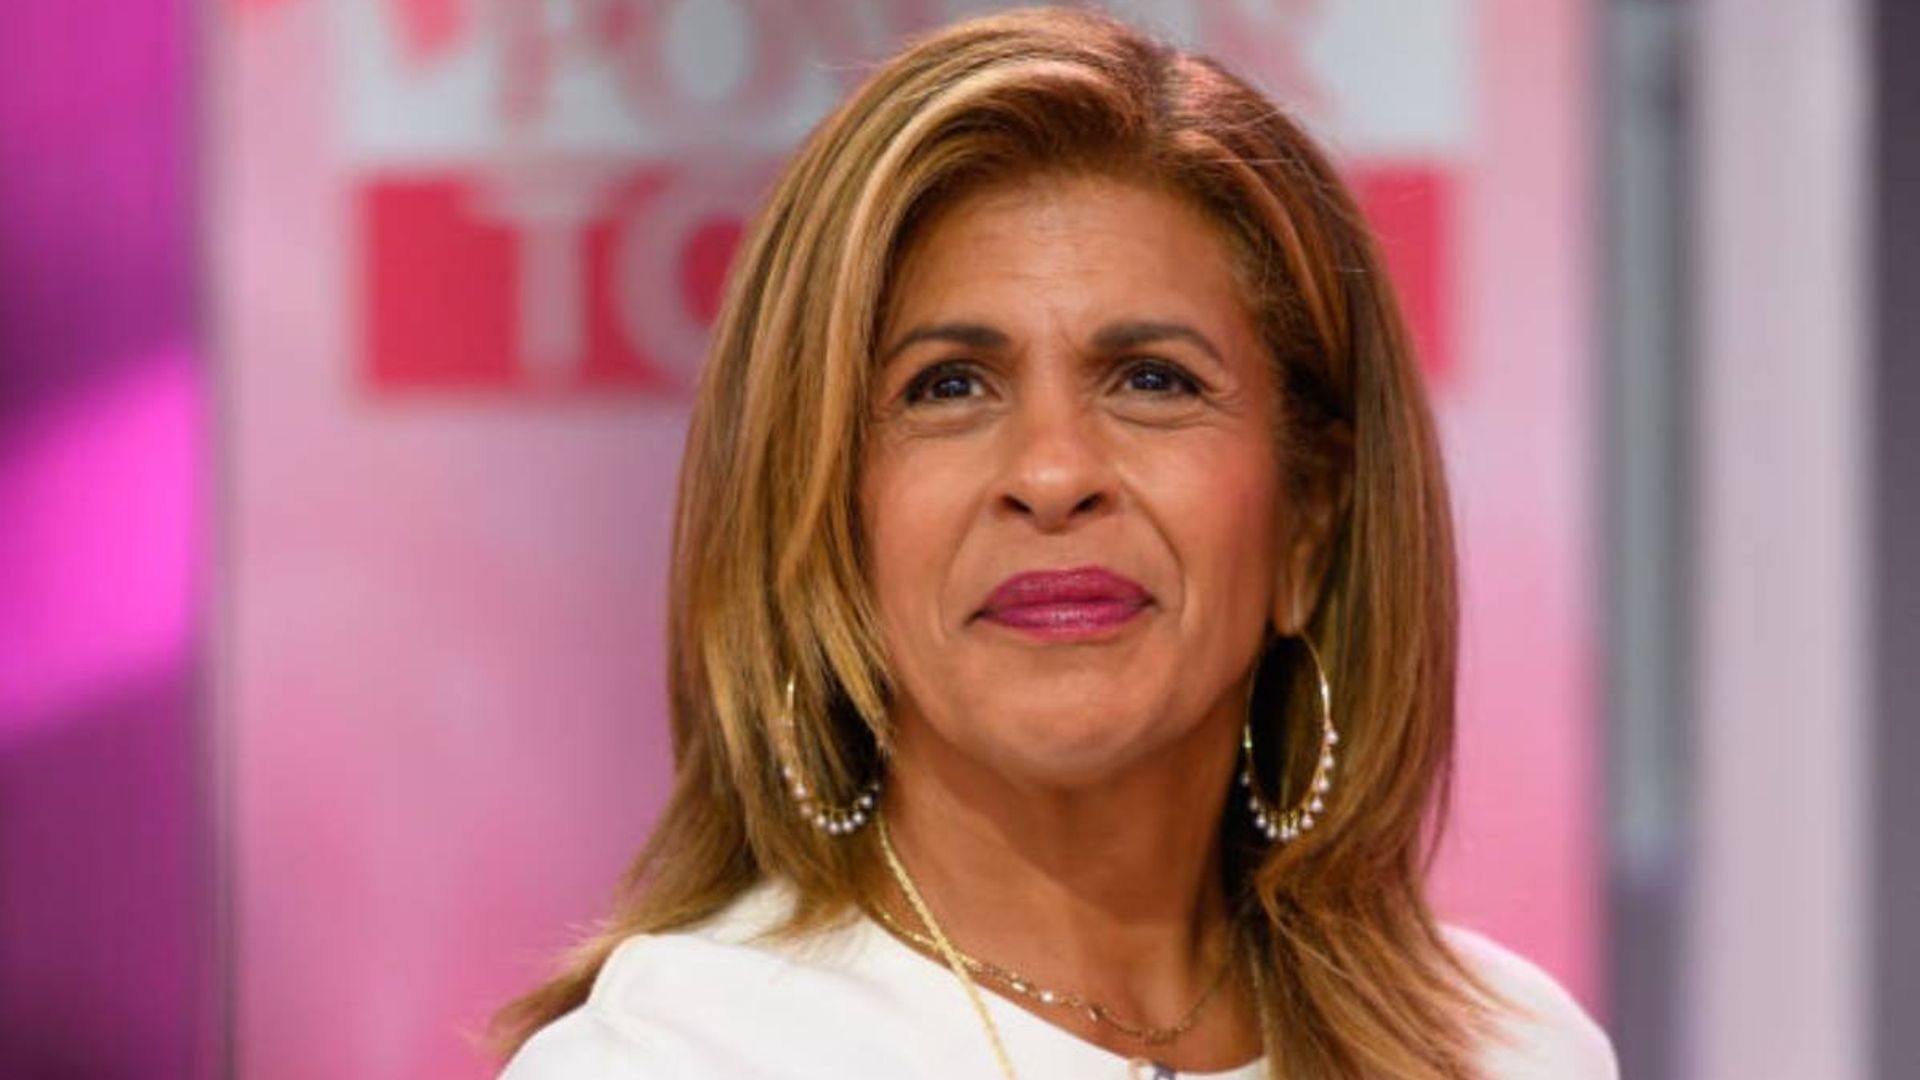 Hoda Kotb makes heartbreaking revelation about her battle with cancer